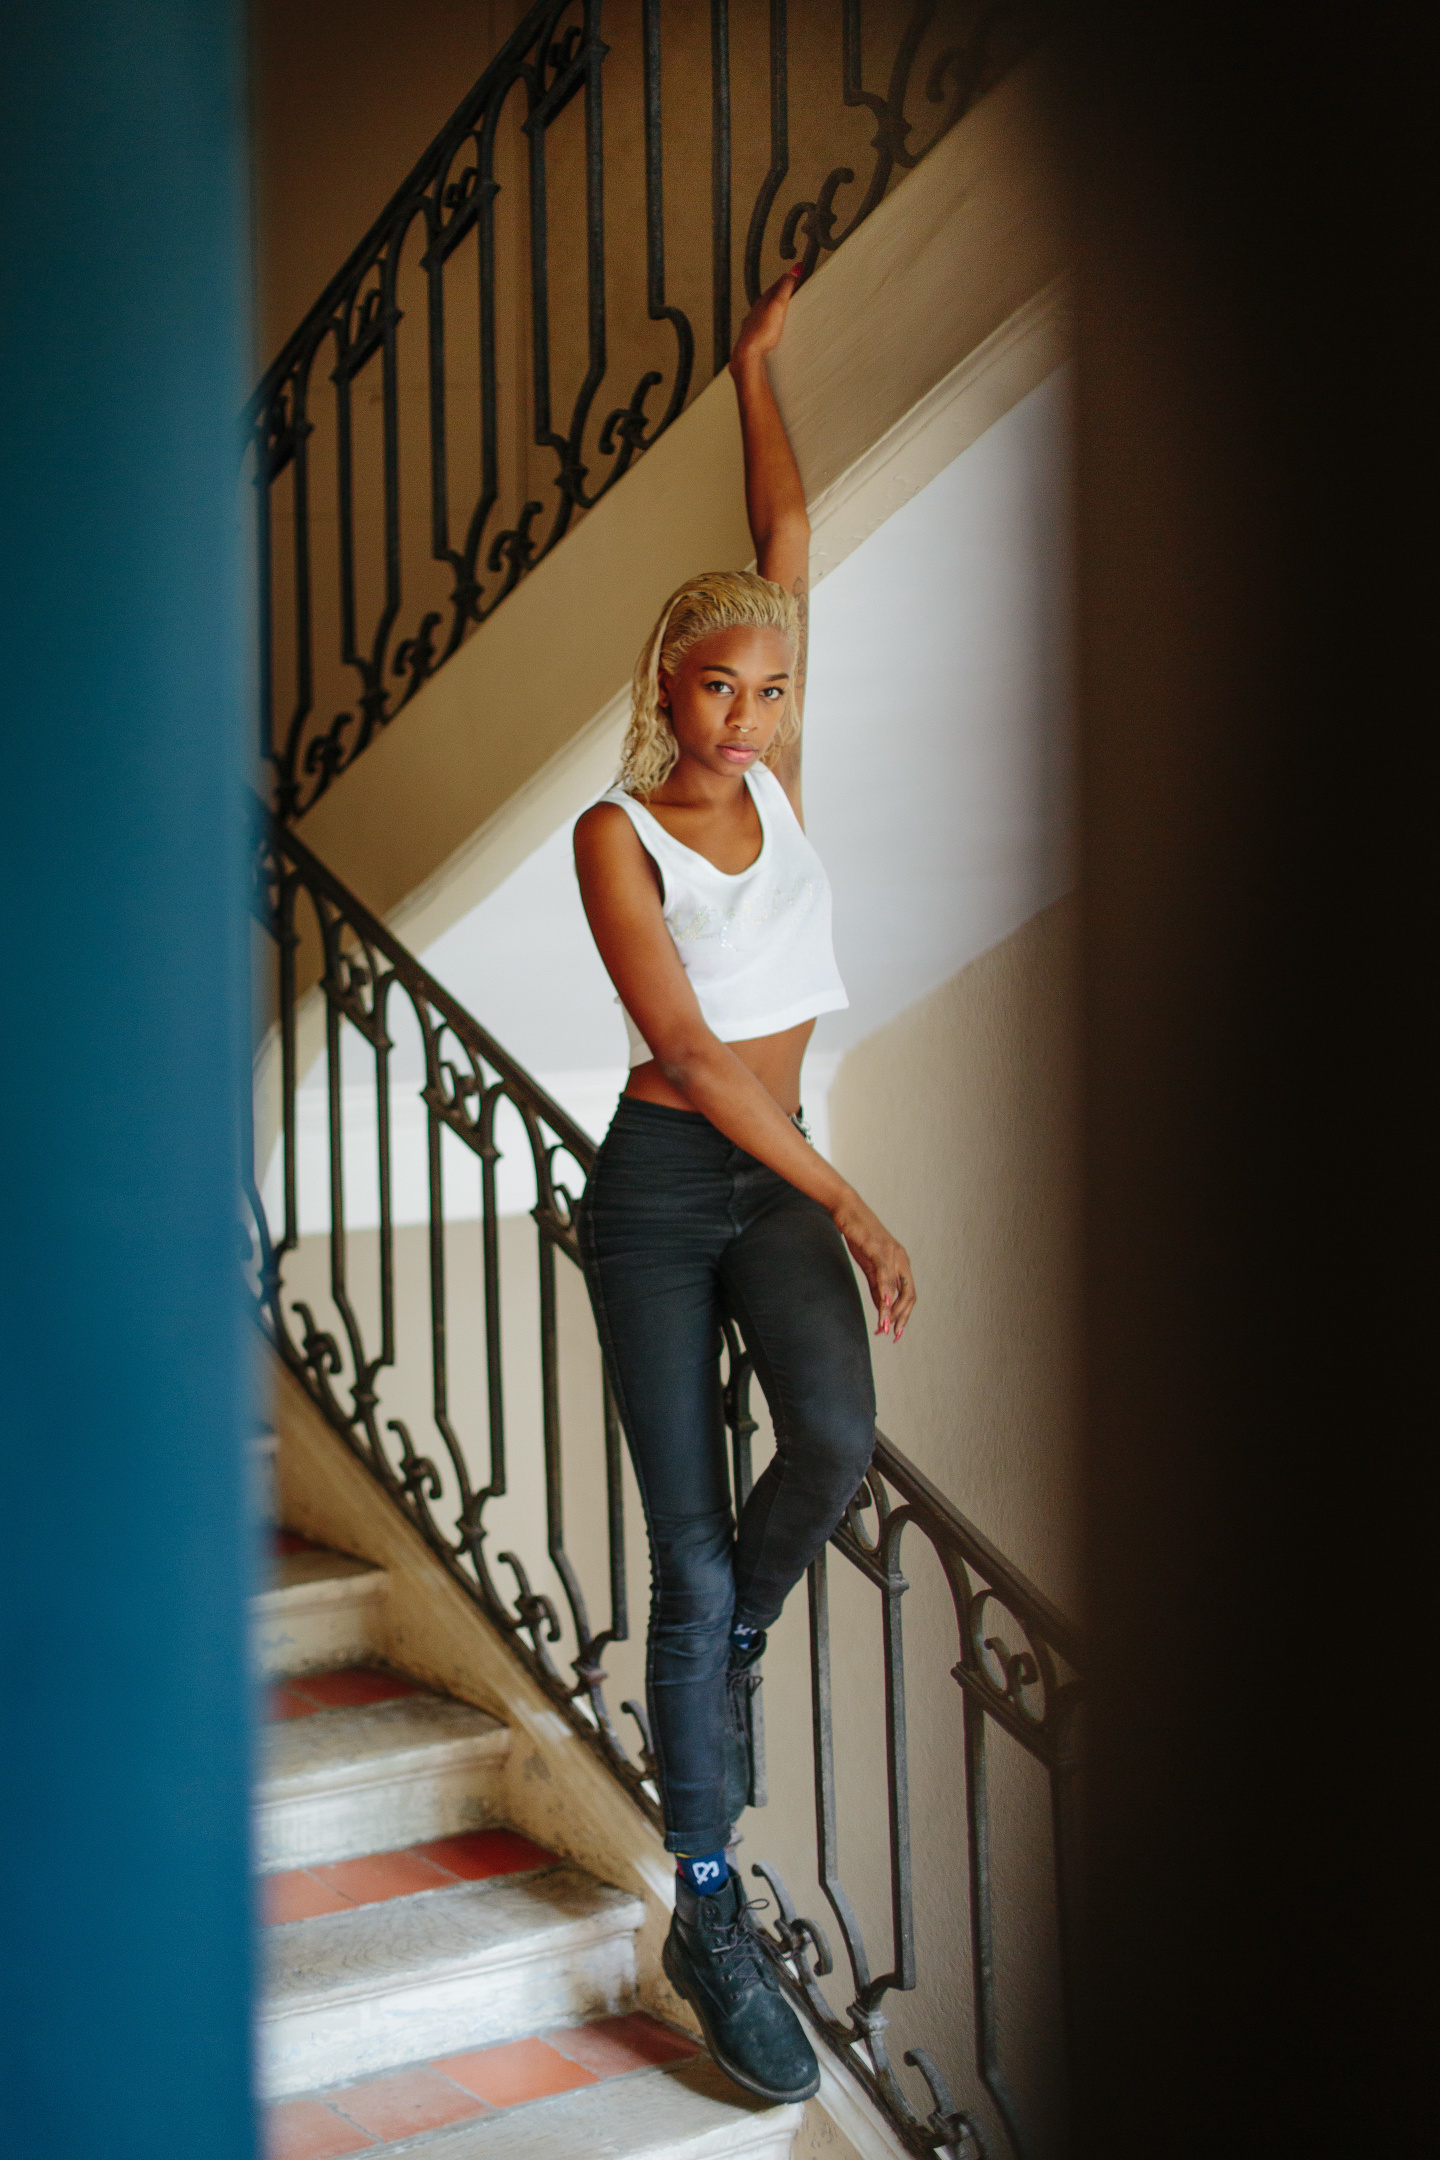  Meet Abra, The Bedroom R&B Singer Who’s Not Afraid To Celebrate Herself